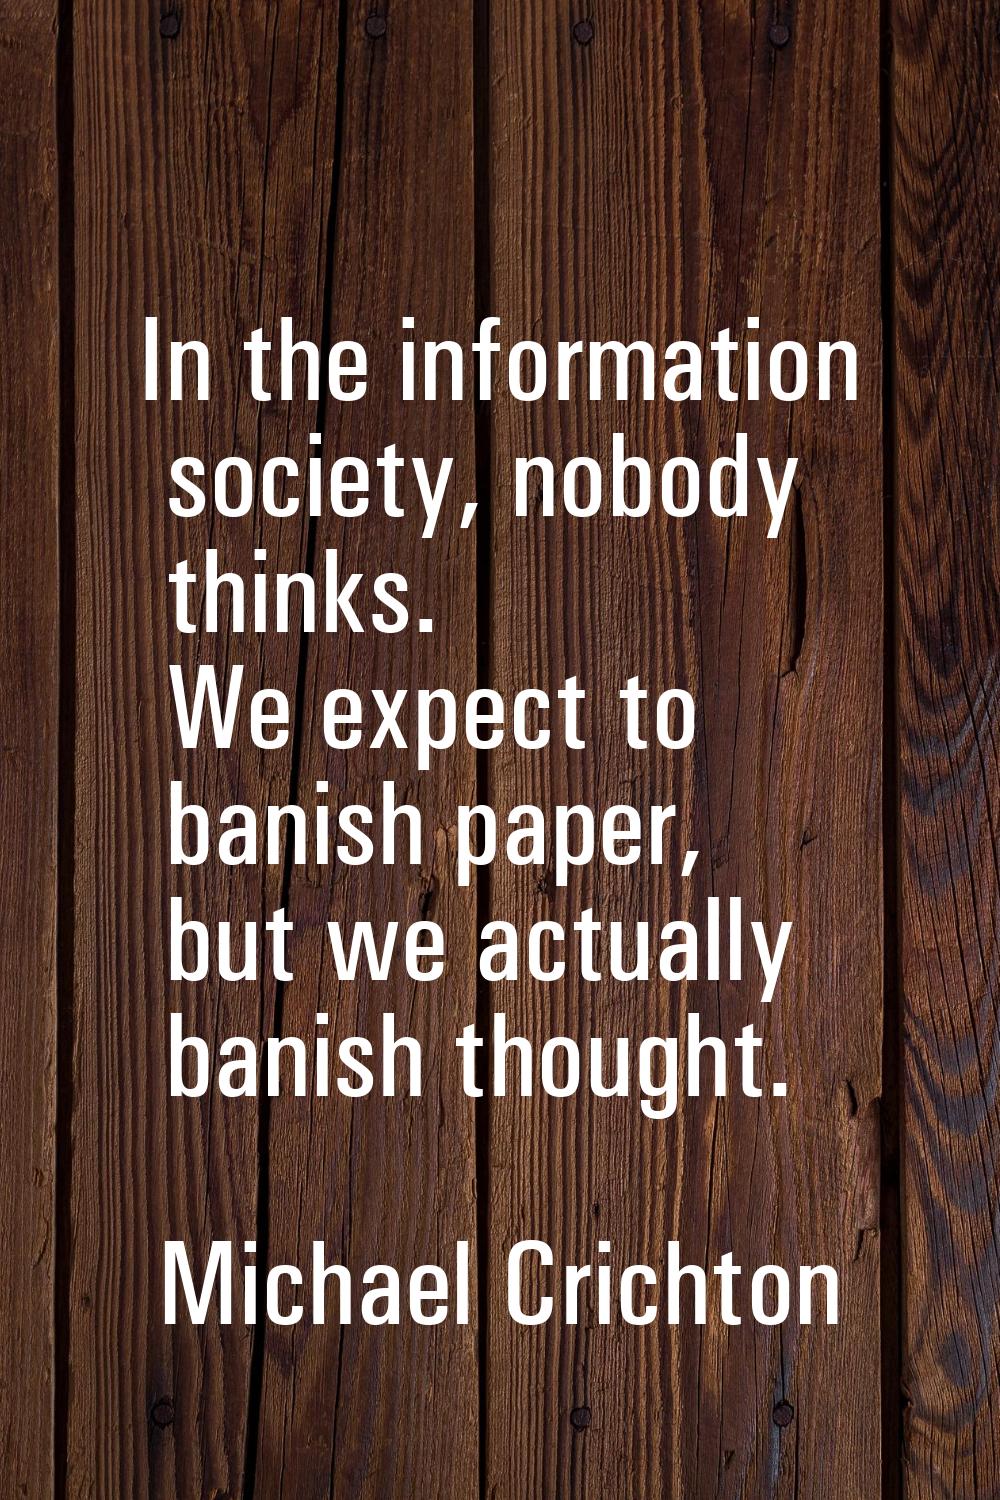 In the information society, nobody thinks. We expect to banish paper, but we actually banish though